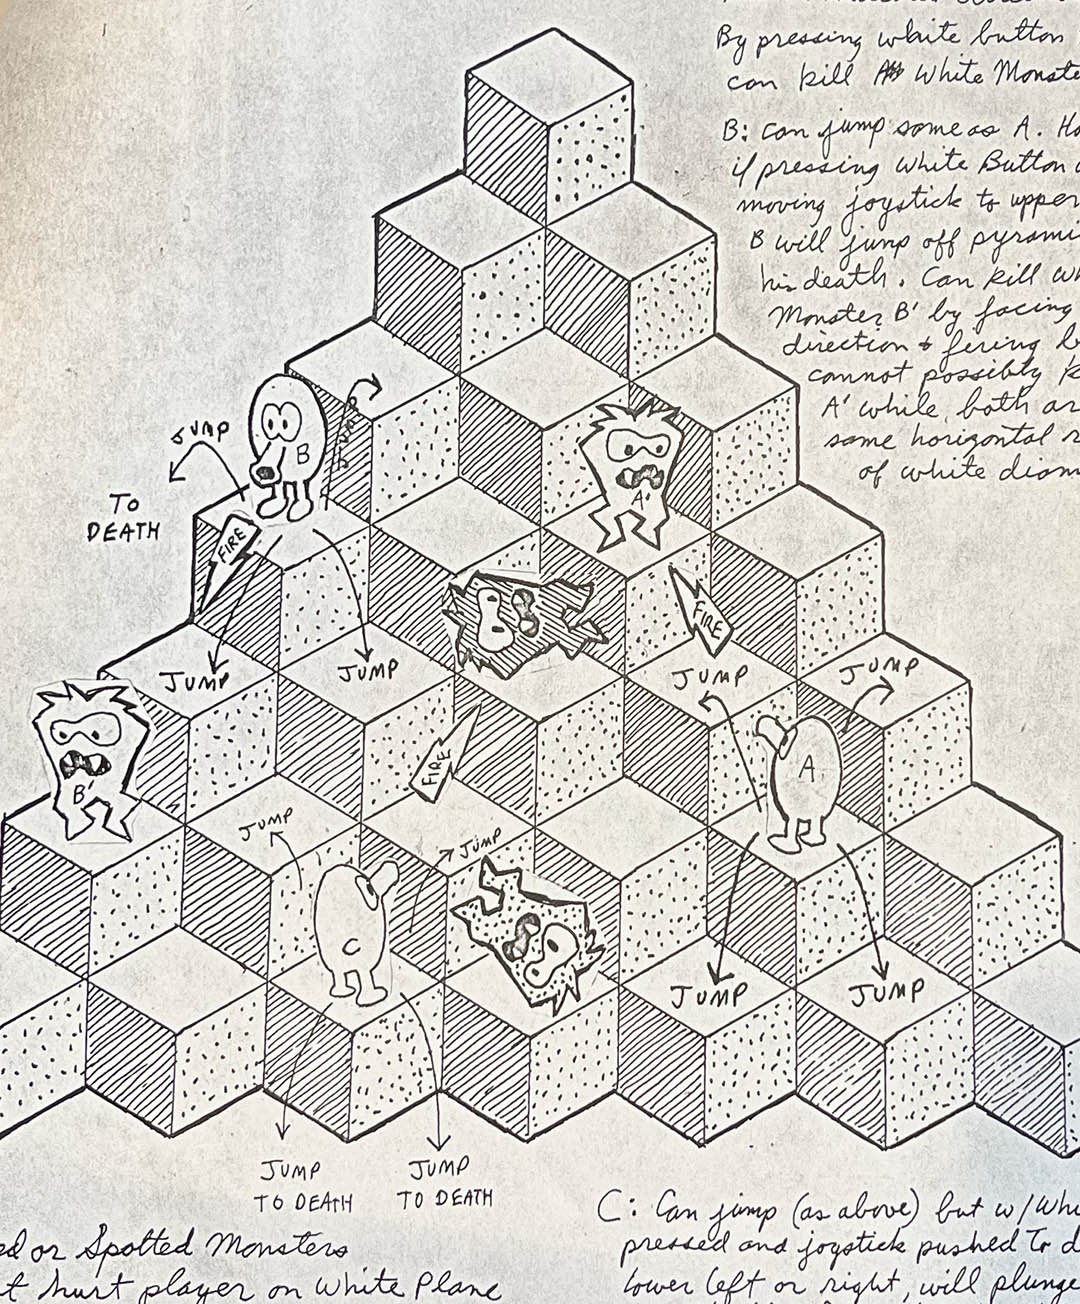 Photocopy of Q*bert gameplay concept, courtesy of Jeff Lee